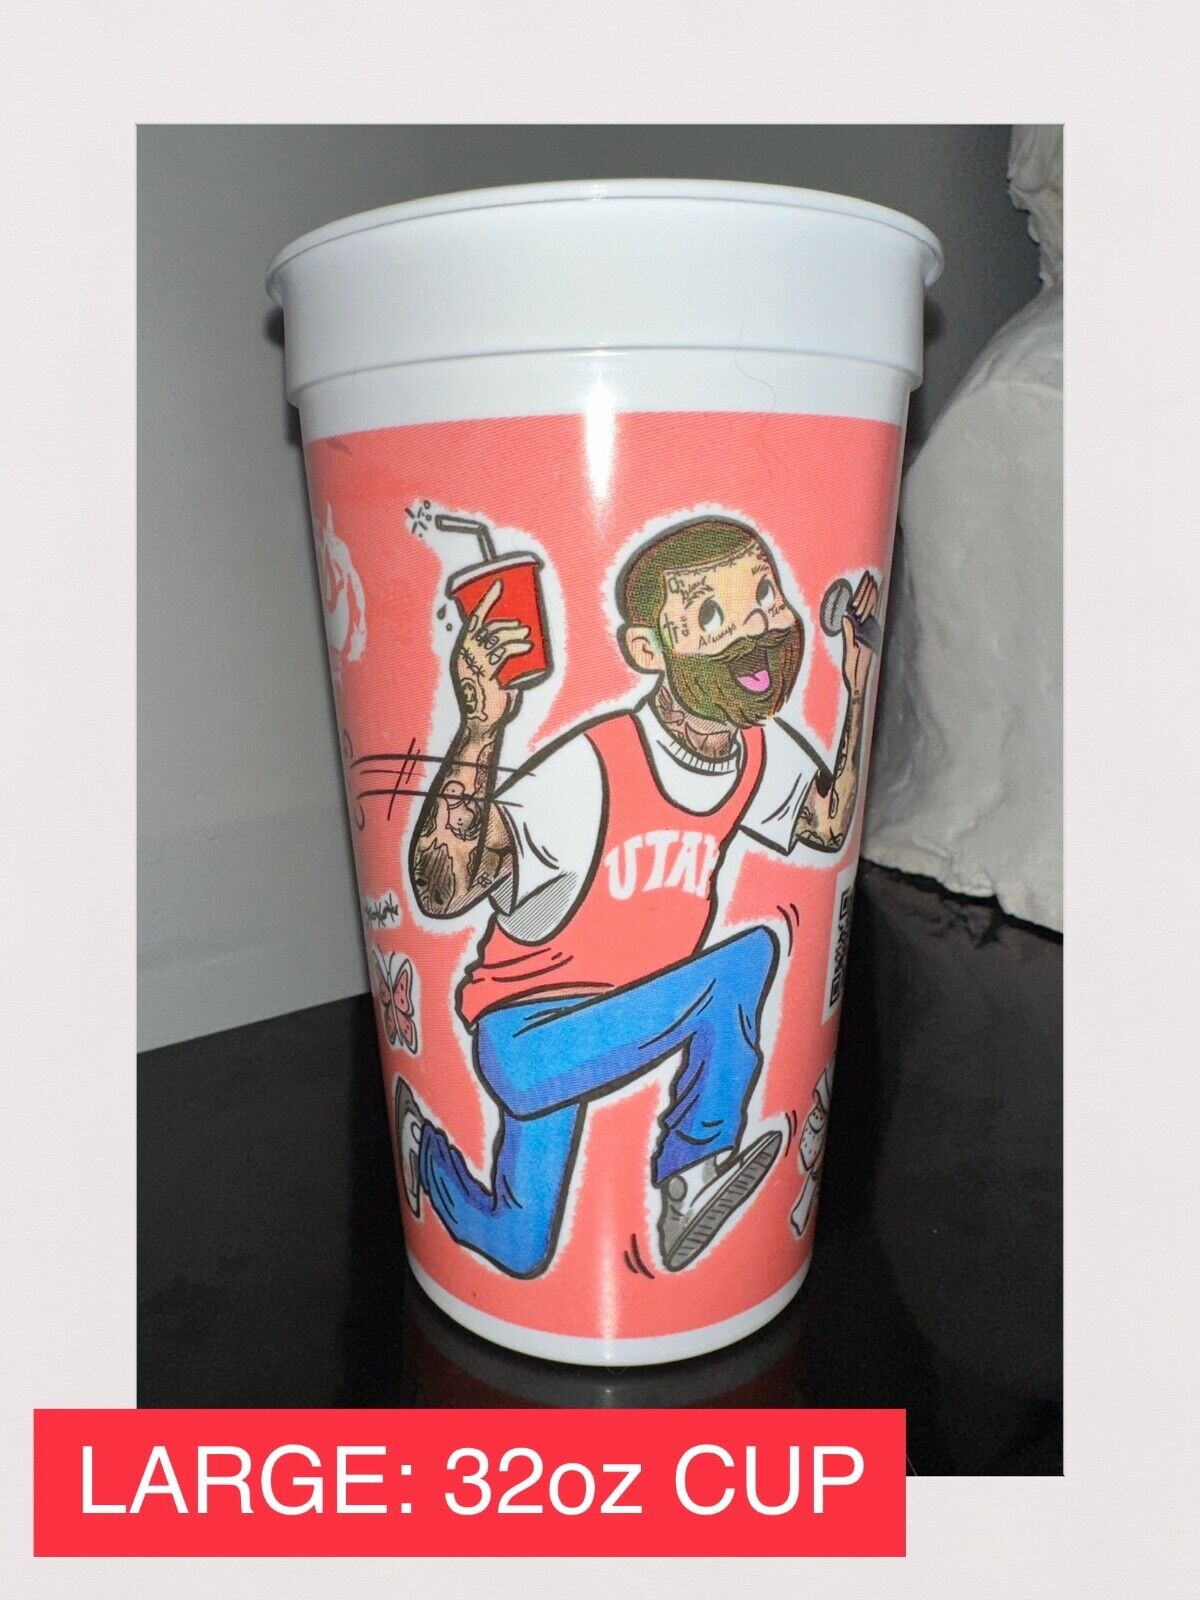 Raising Canes Post Malone Promotional Cup 4